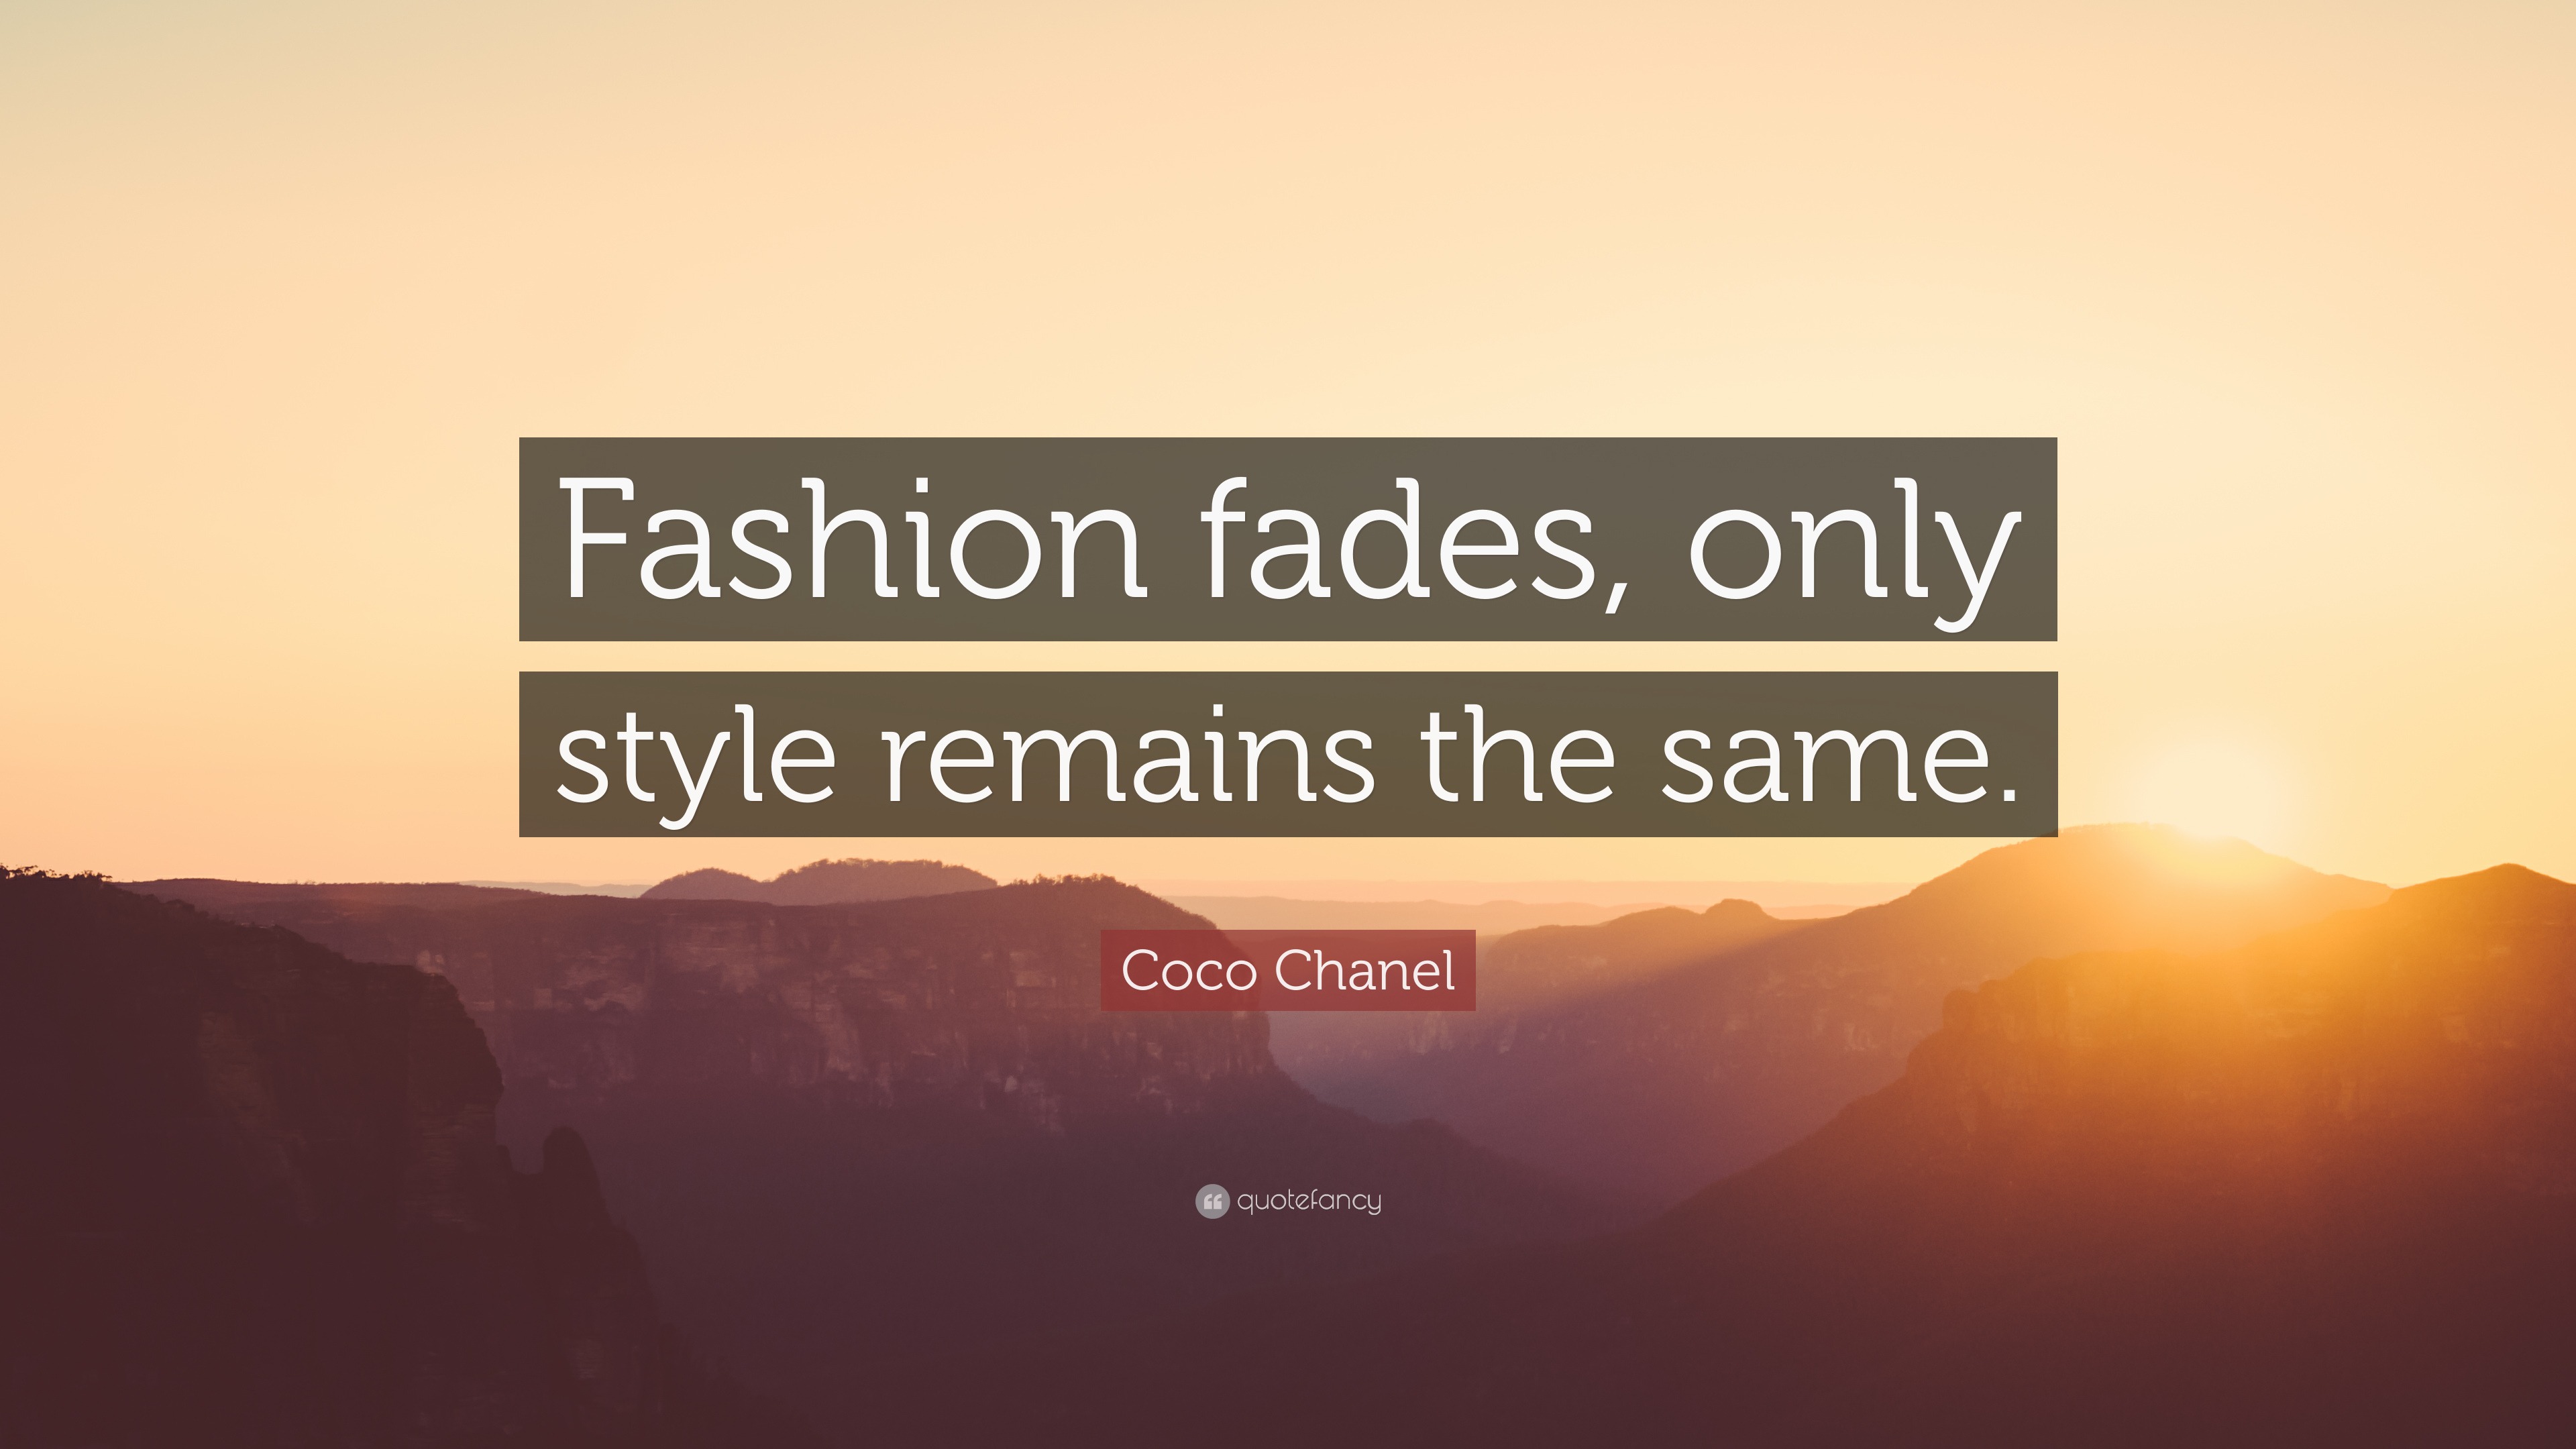 Wall Decal Fashion Fades Only Style Remains quote Beauty Inscription mural M688